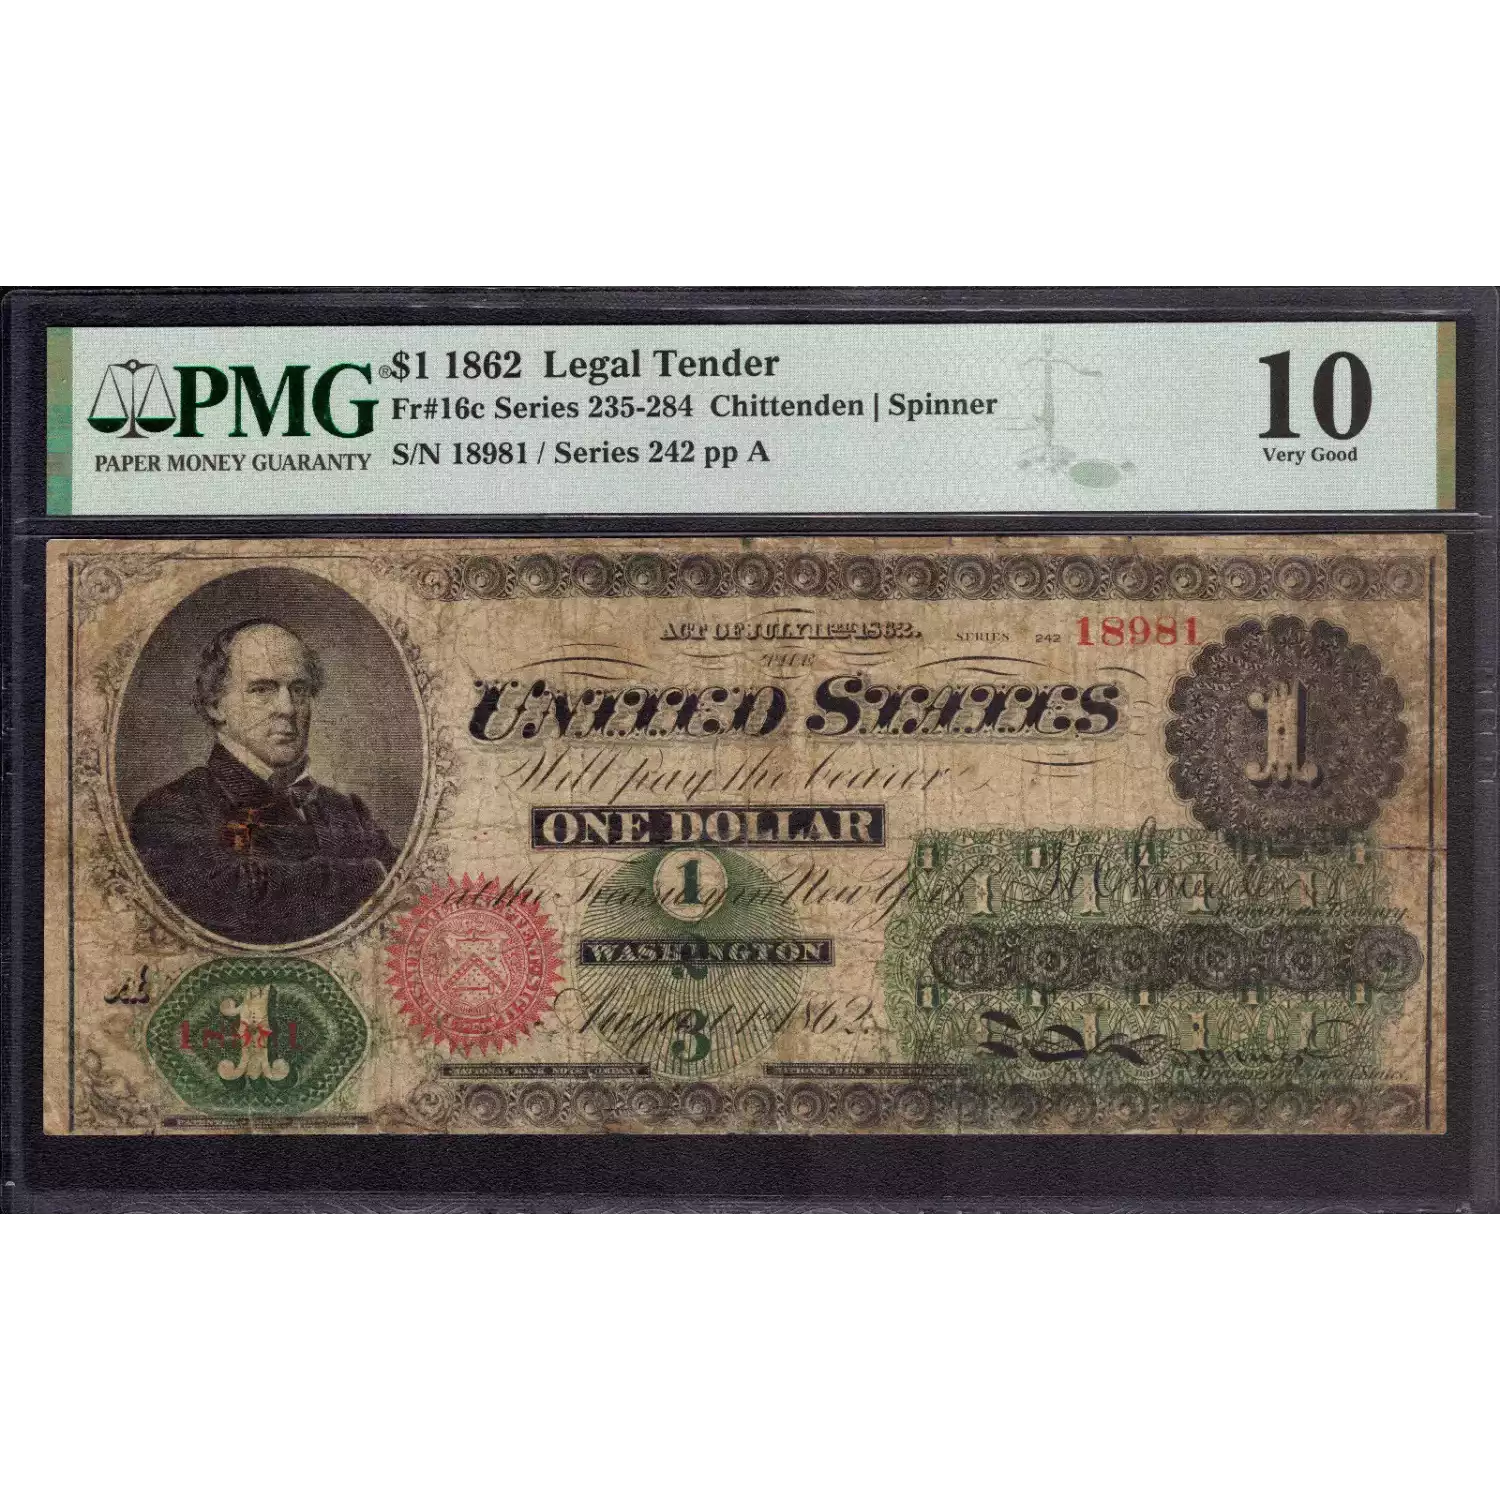 $1 Series 235-284 at right No ABNCo monogram. No green patent date Type 2; Red Seal Legal Tender Issues 16c